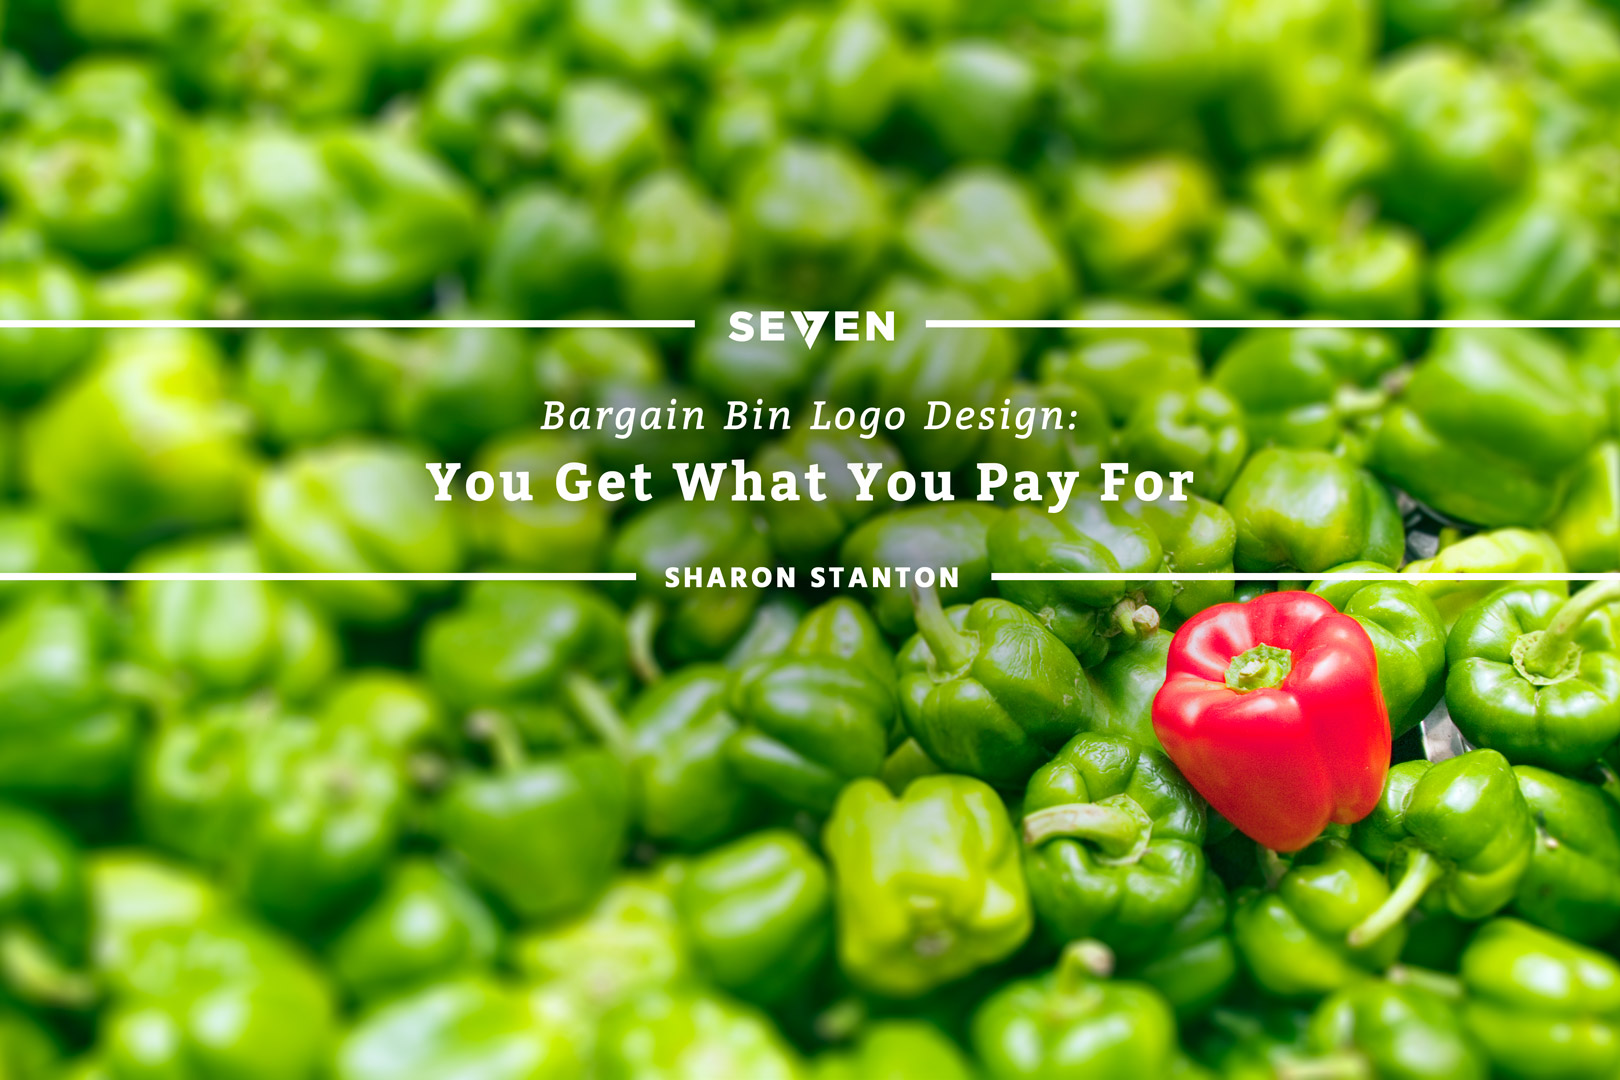 Bargain Bin Logo Design: You Get What You Pay For